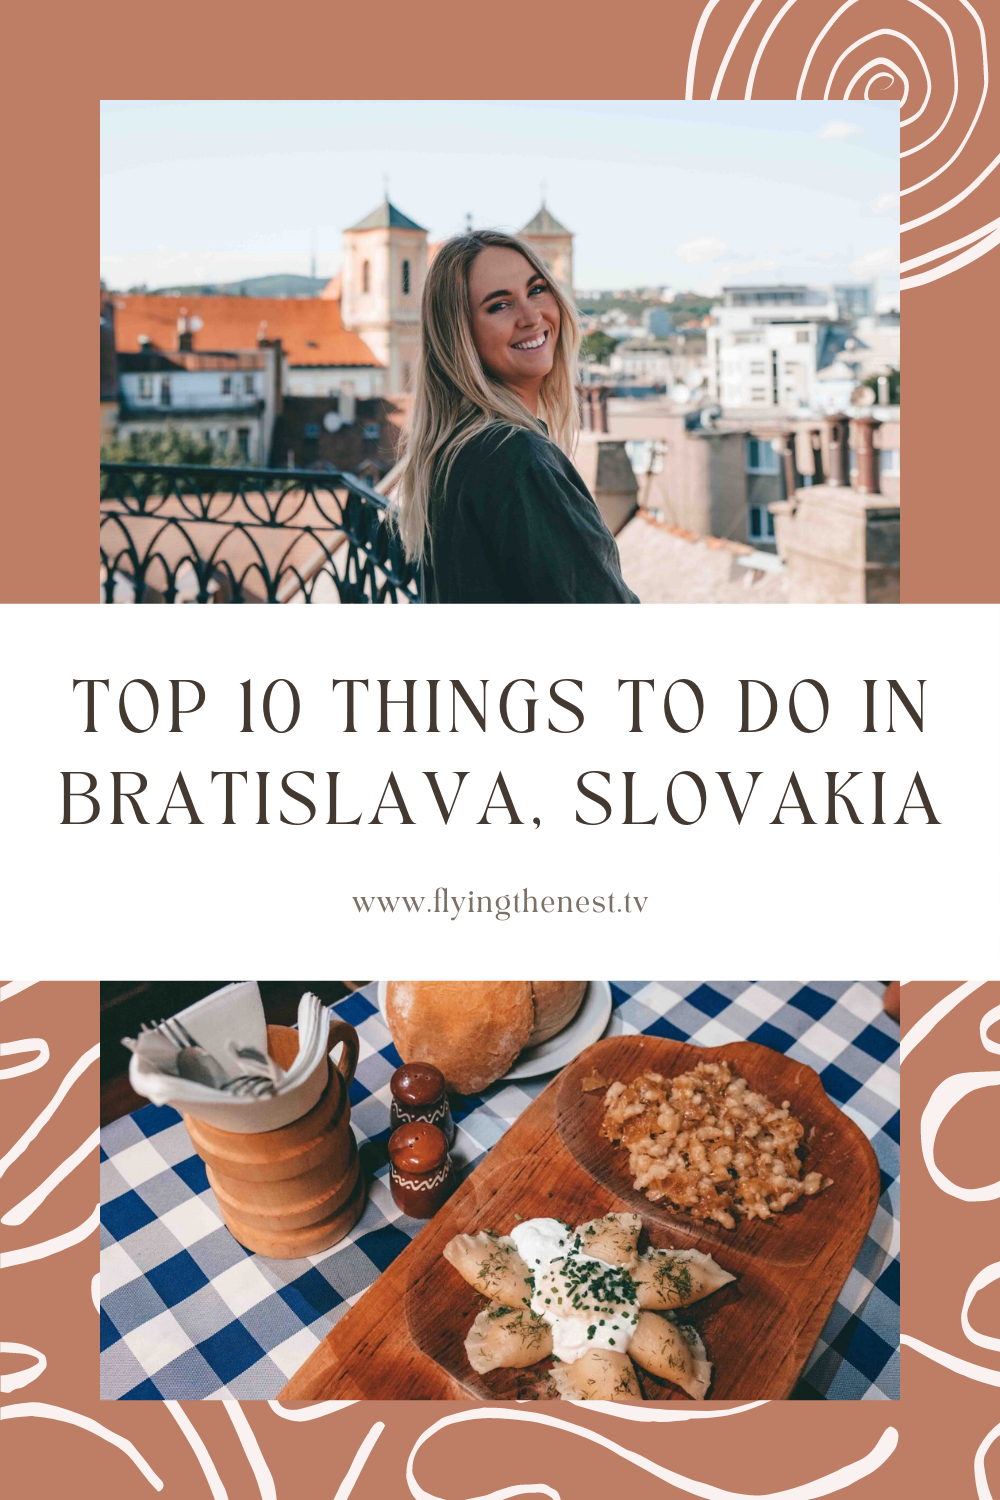 TOP 10 THINGS TO DO IN BRATISLAVA, SLOVAKIA.png